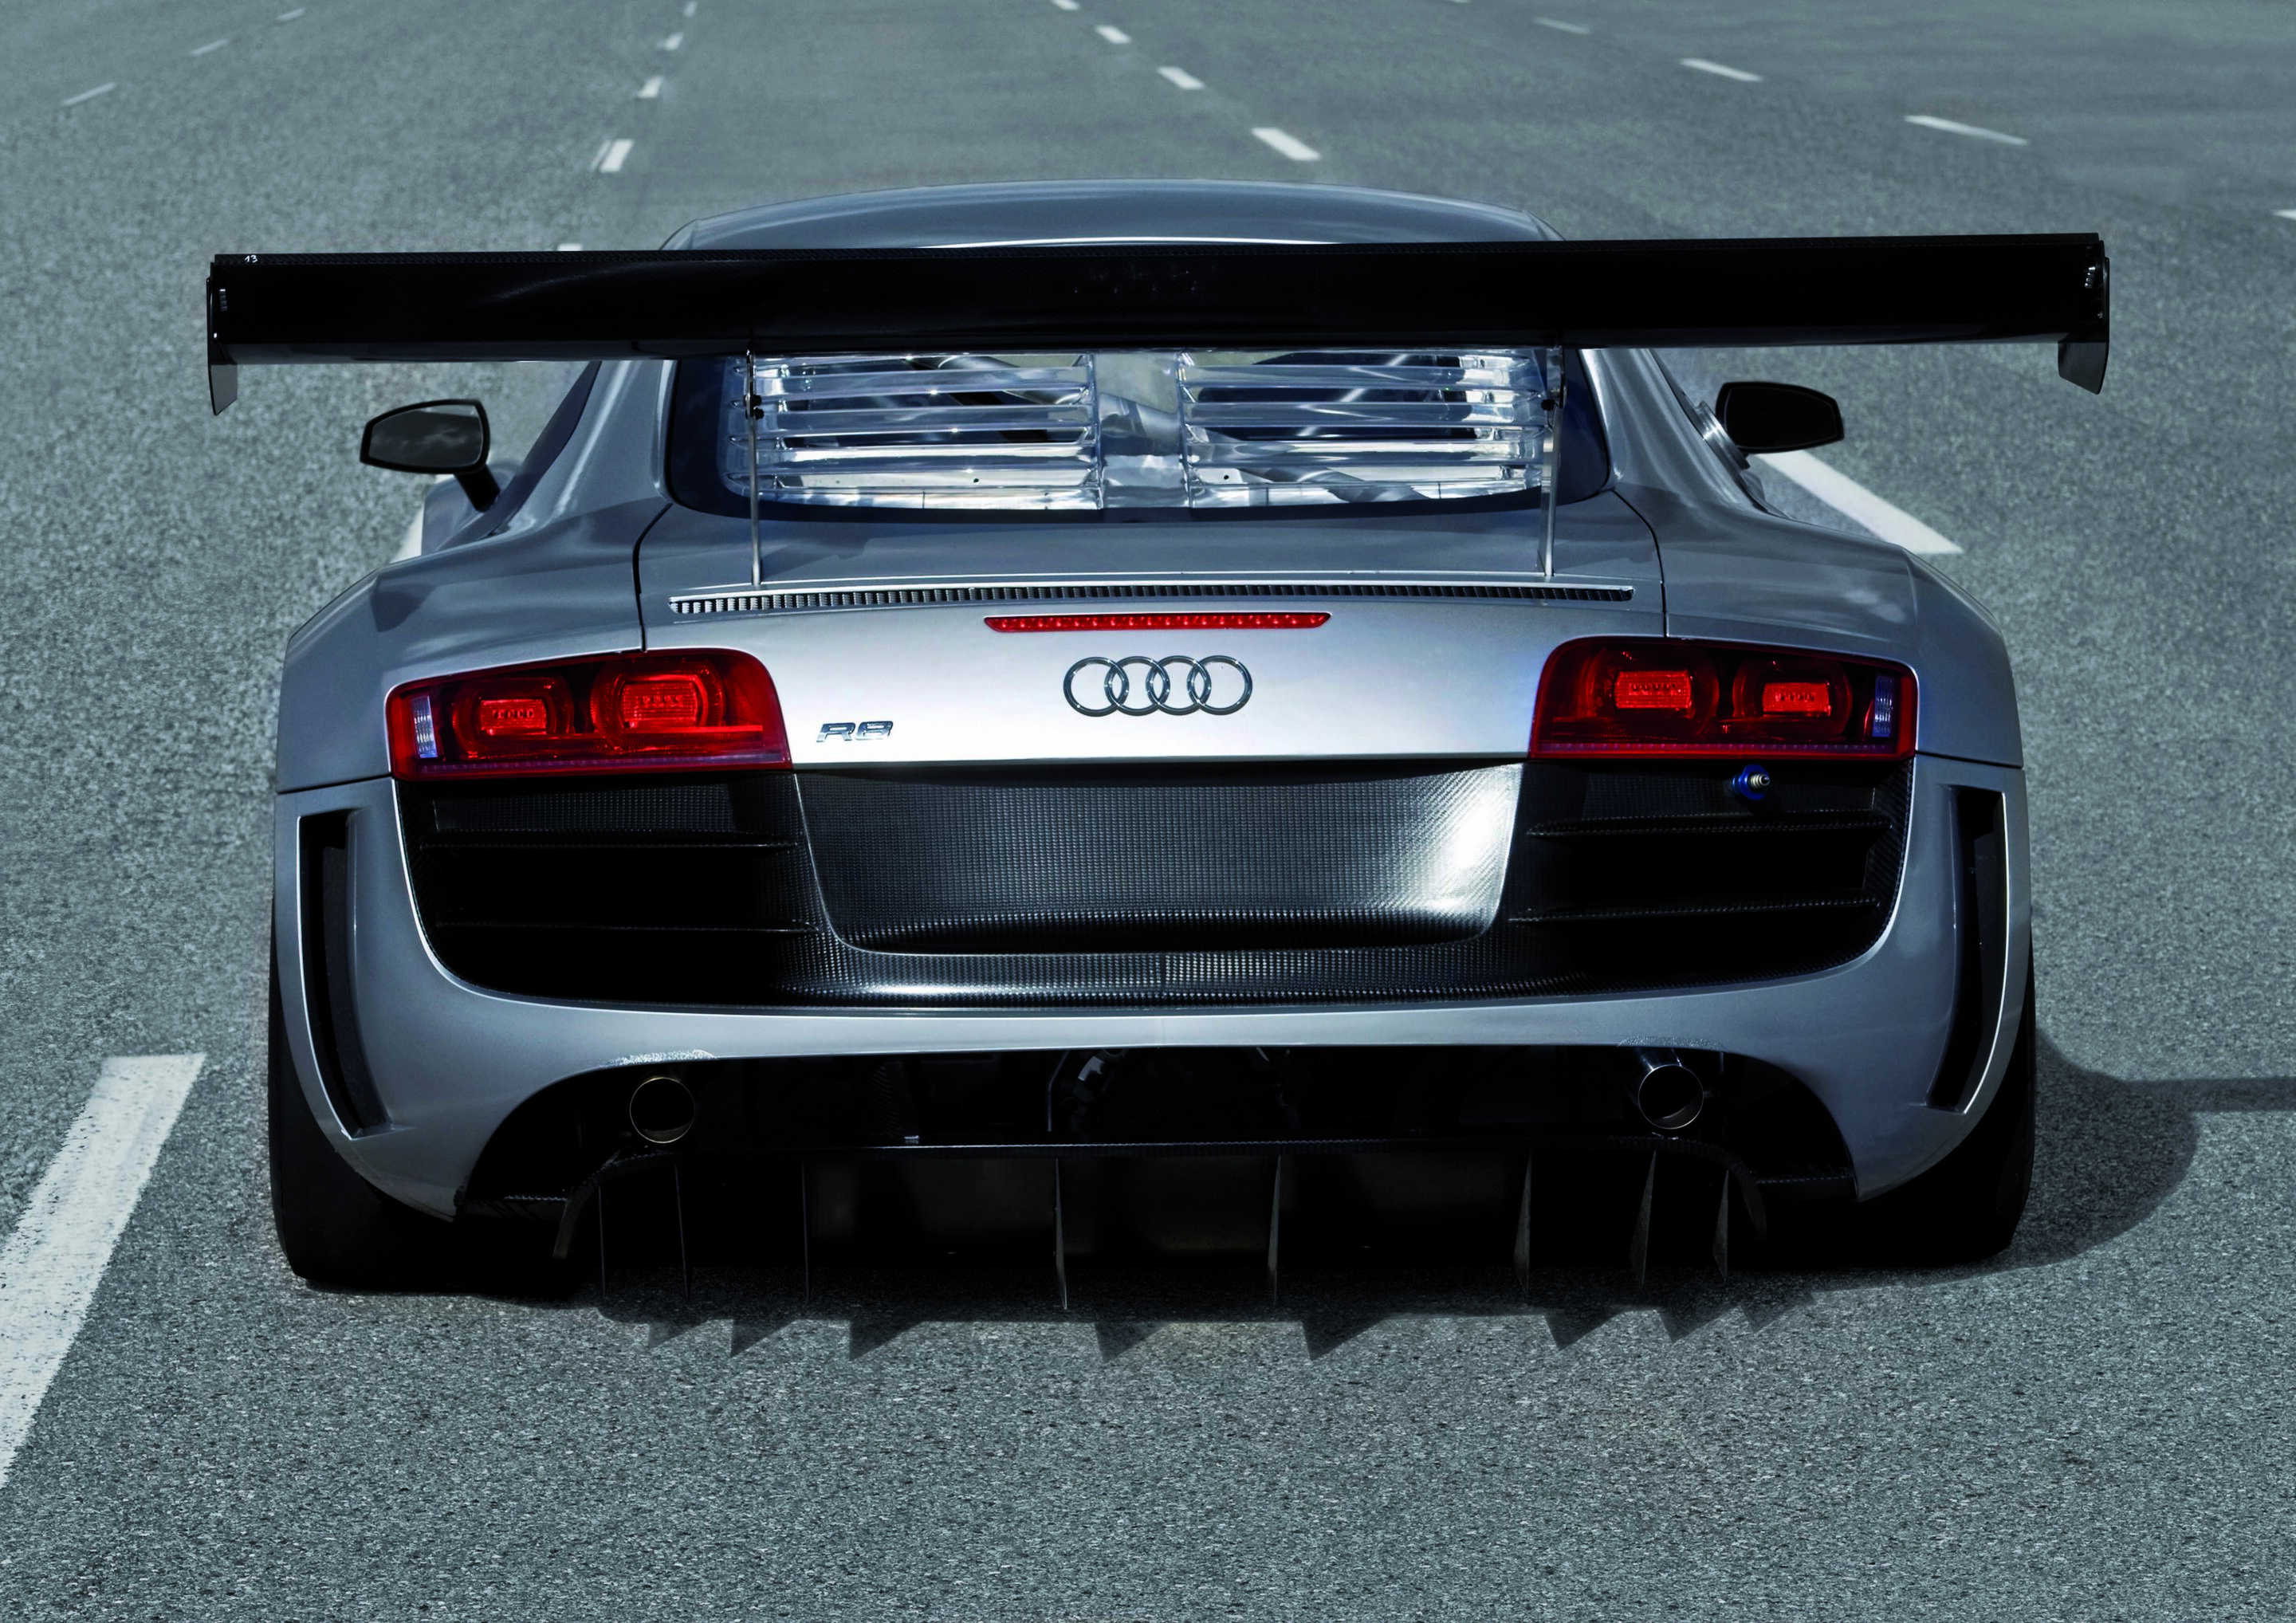 GT3 version of the Audi R8